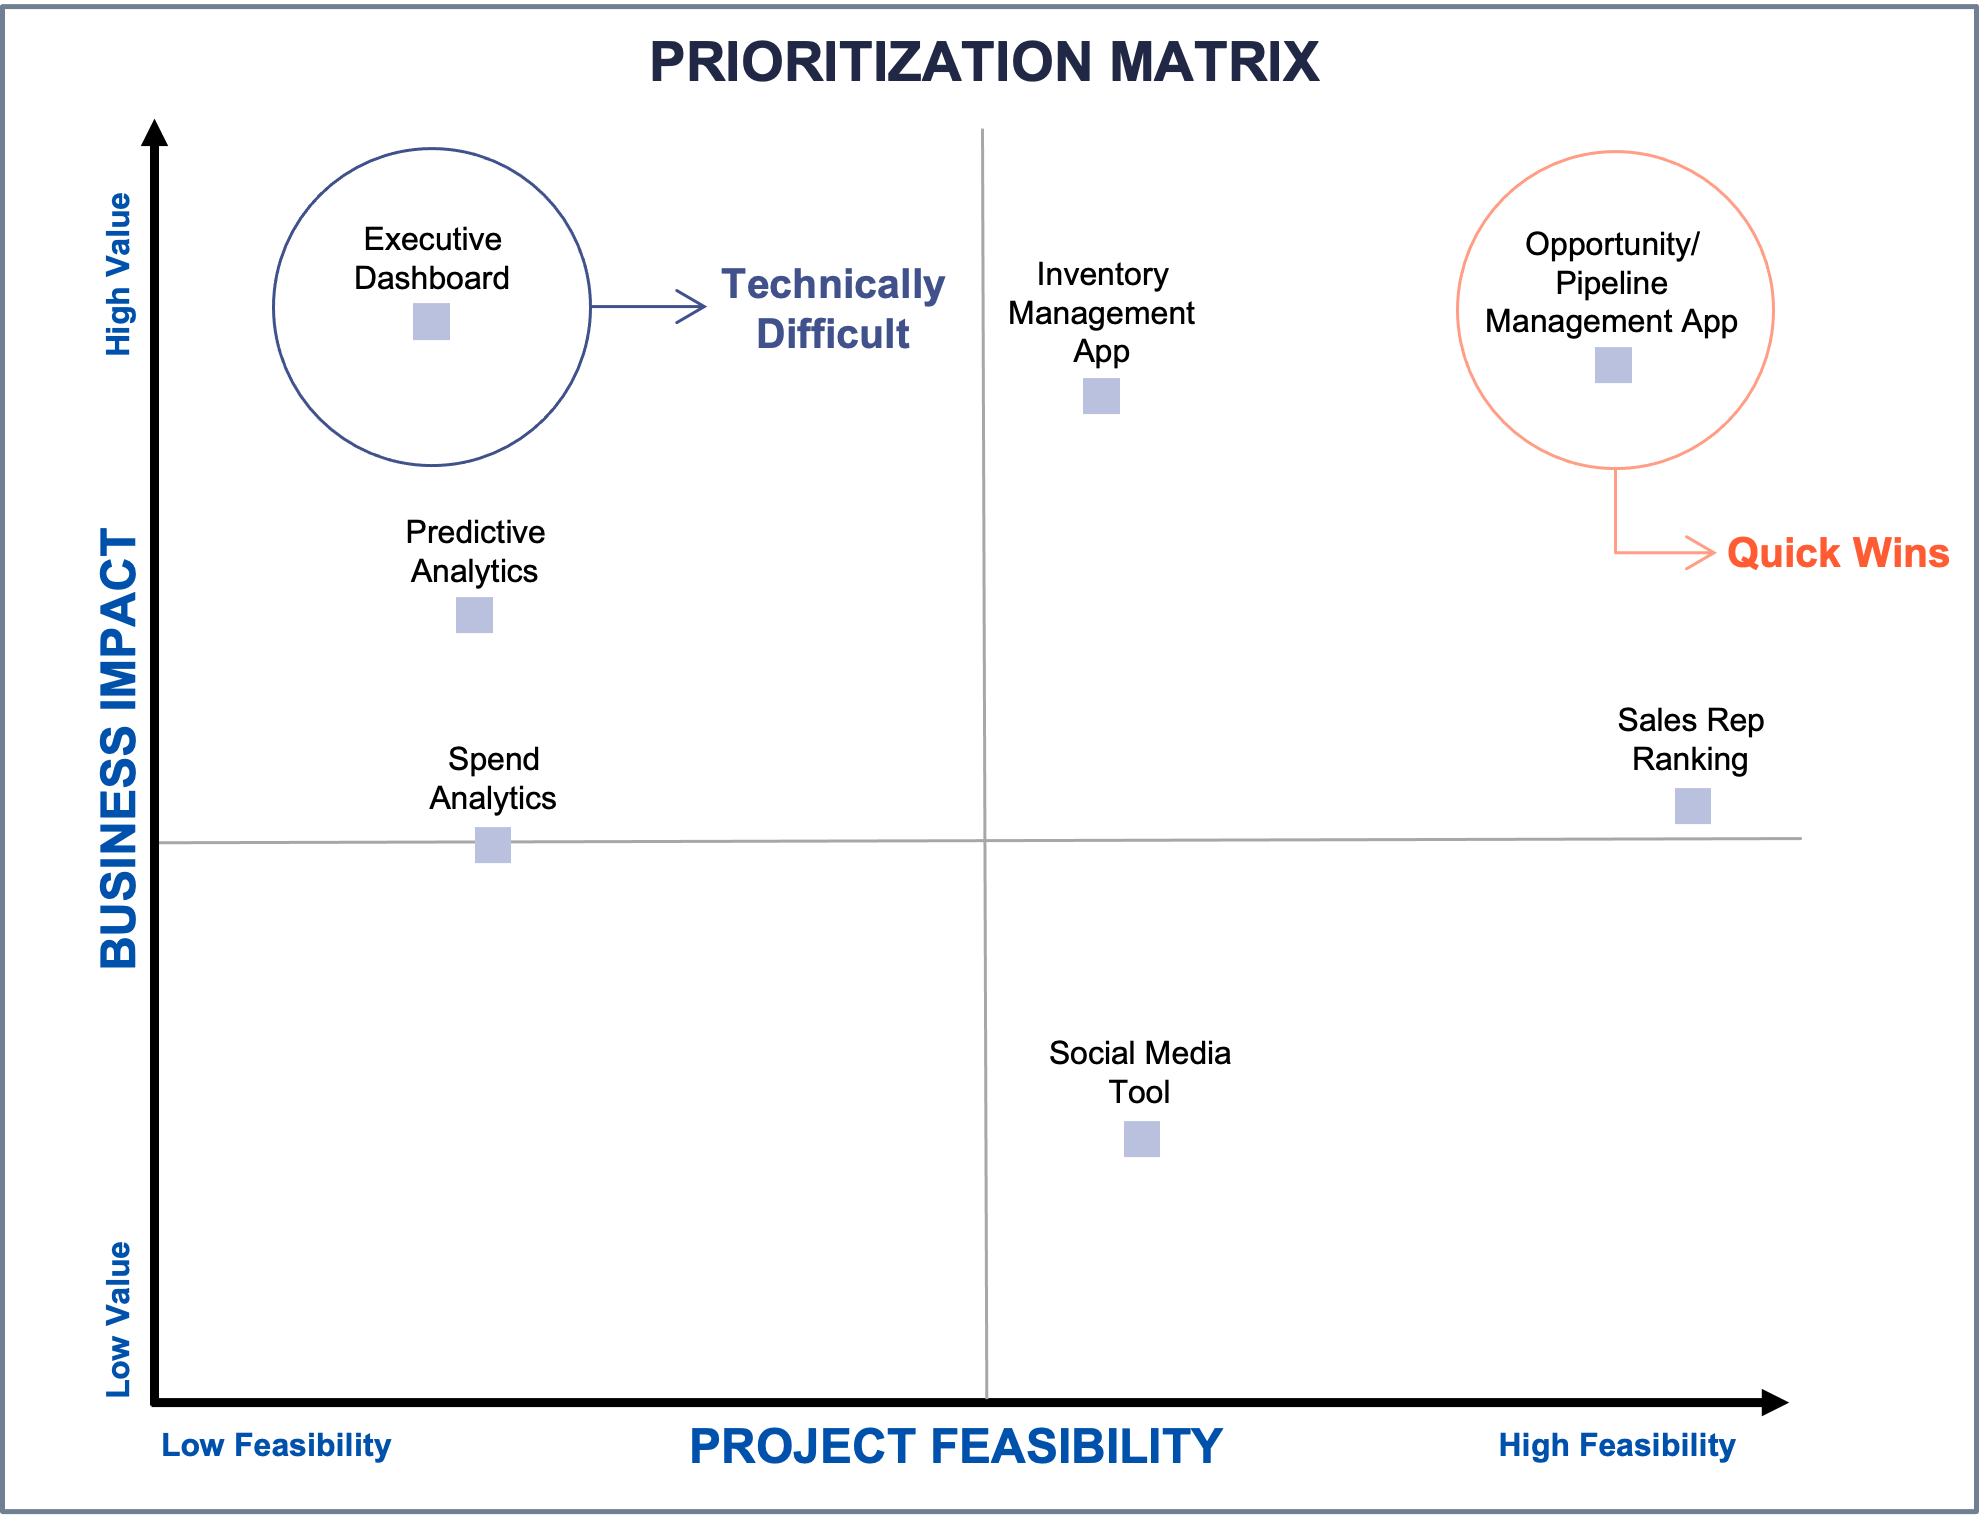 Graphic illustrates a Prioritization Matrix used during a Data Strategy Assessment to the identify high feasibility/high value projects that should kick off data and analytics initiatives.